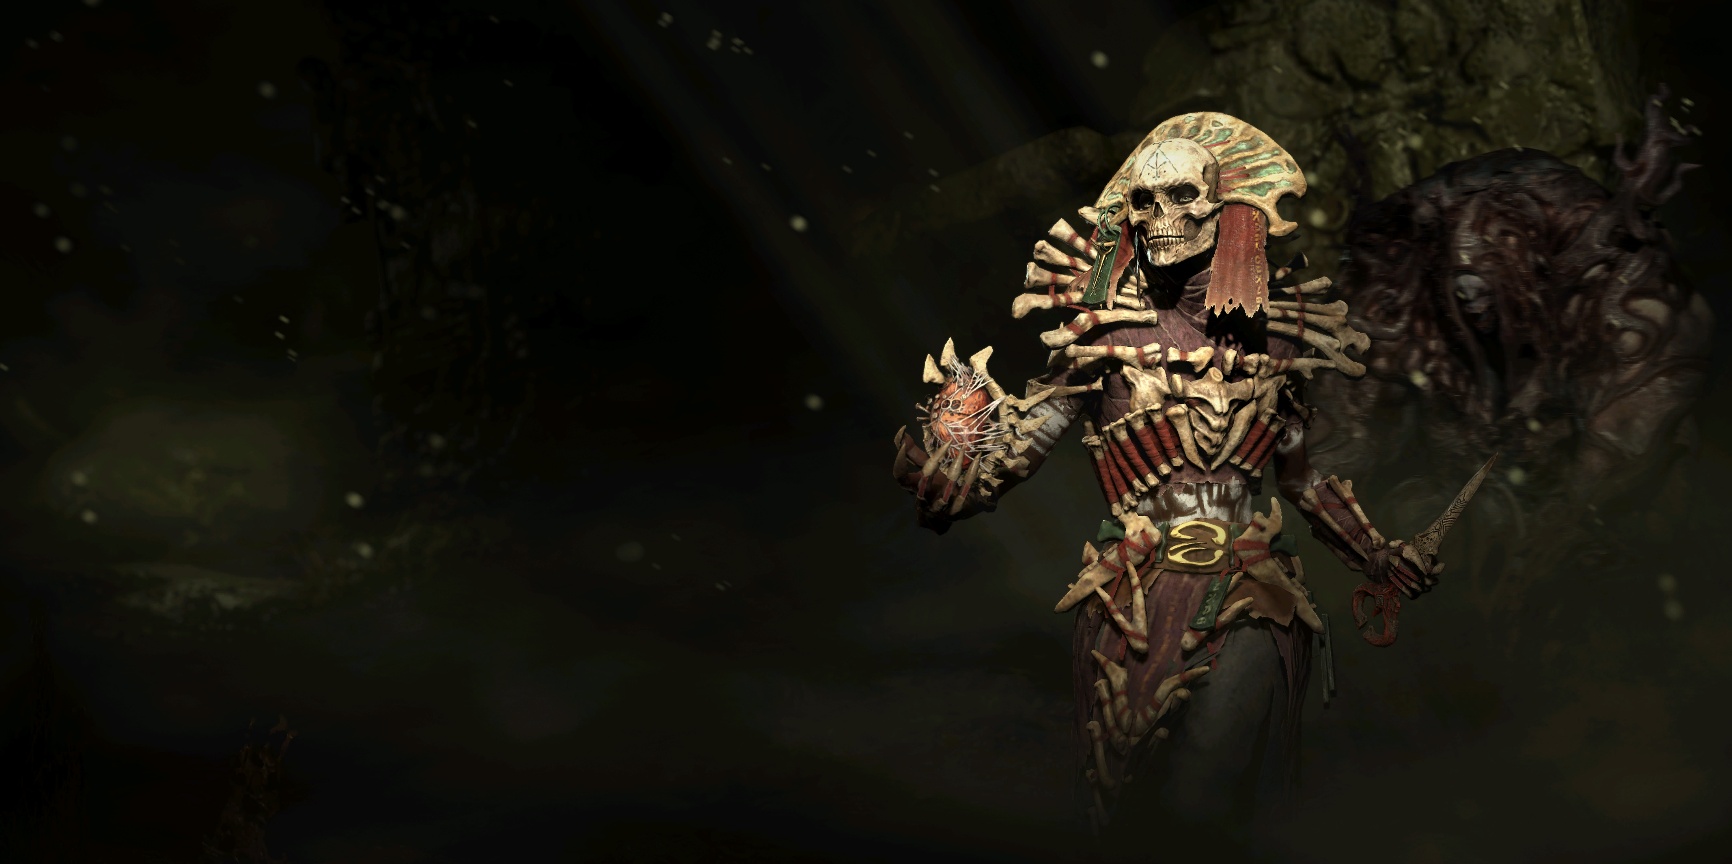 New Diablo 4 Necromancer Shop Sets - Coven of the Blood Saint, Veins of the  Blood Saint, Hellgate Inquisitor - Wowhead News